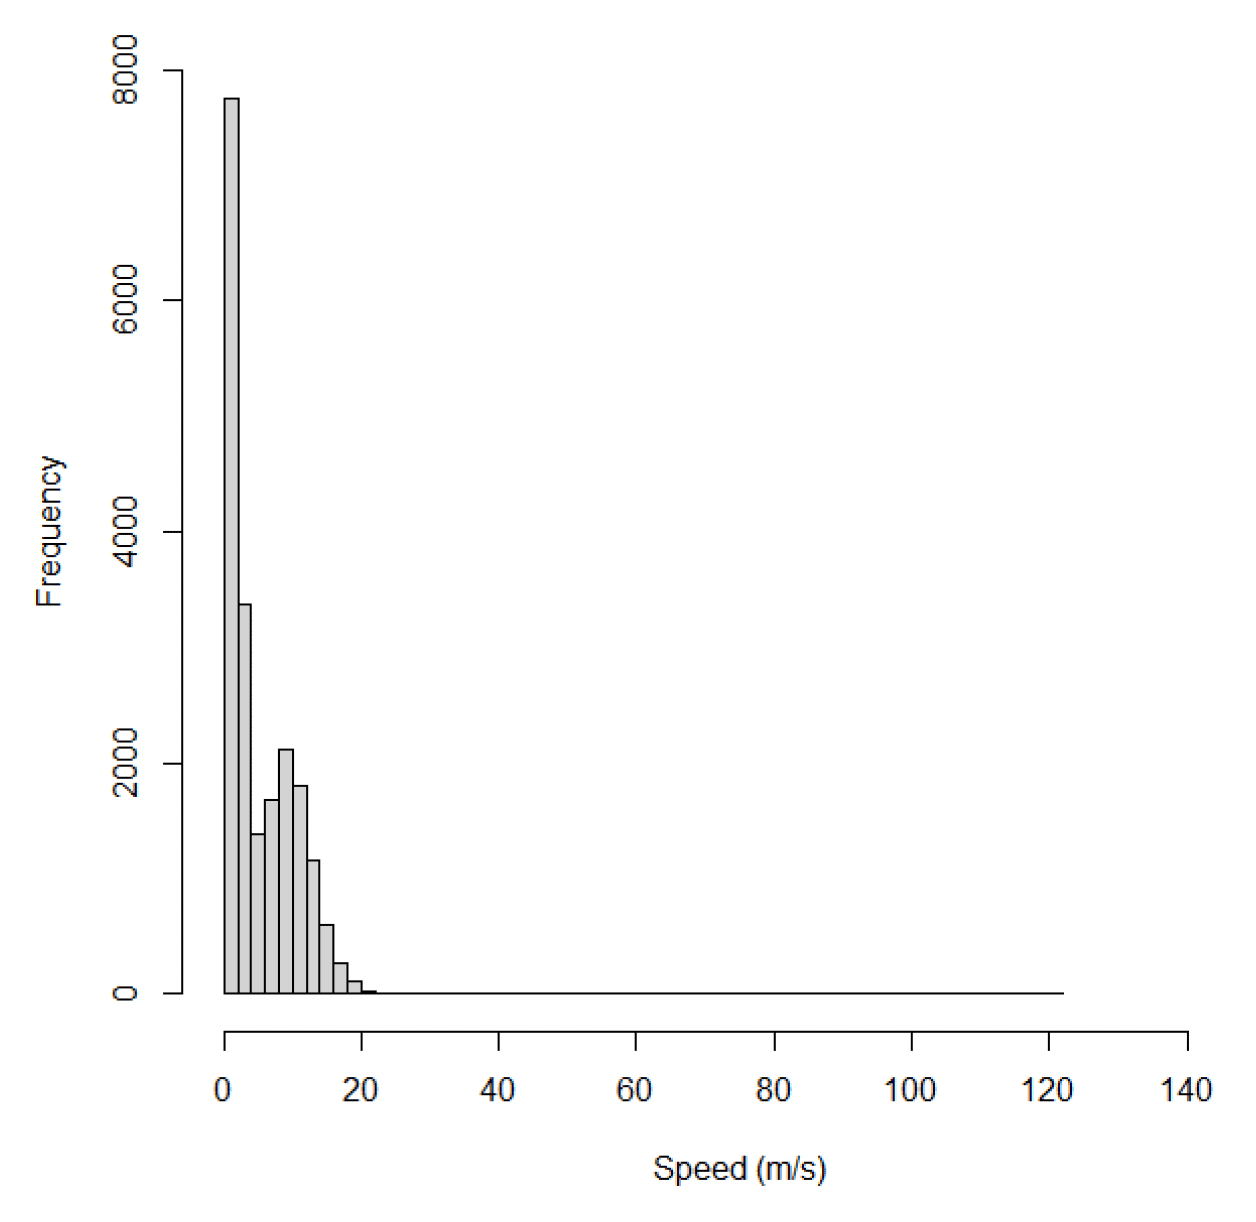 Distribution of flight speeds measured from kittiwakes at Flamborough Head and Bempton Cliffs.